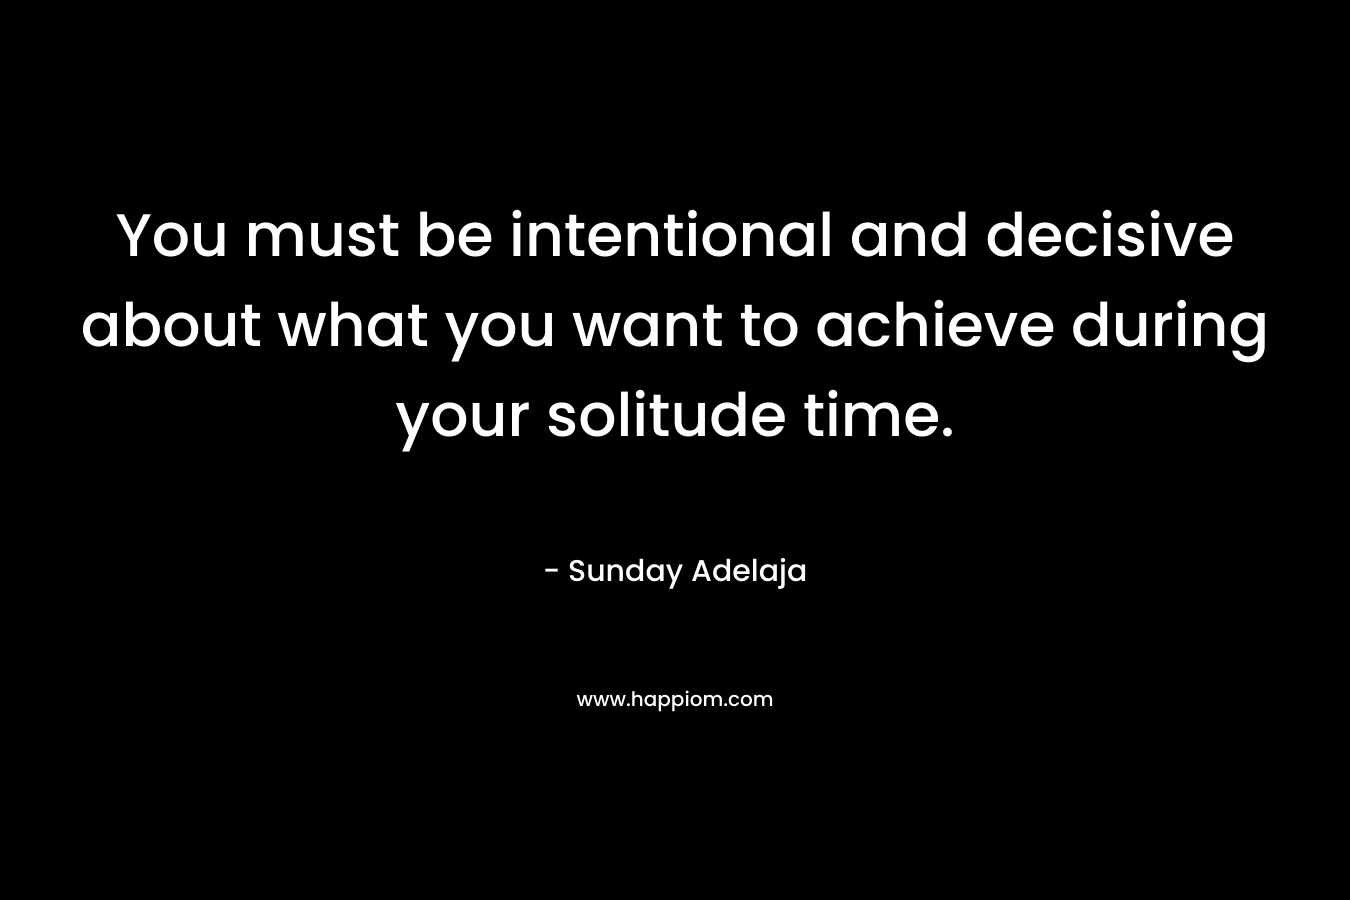 You must be intentional and decisive about what you want to achieve during your solitude time.